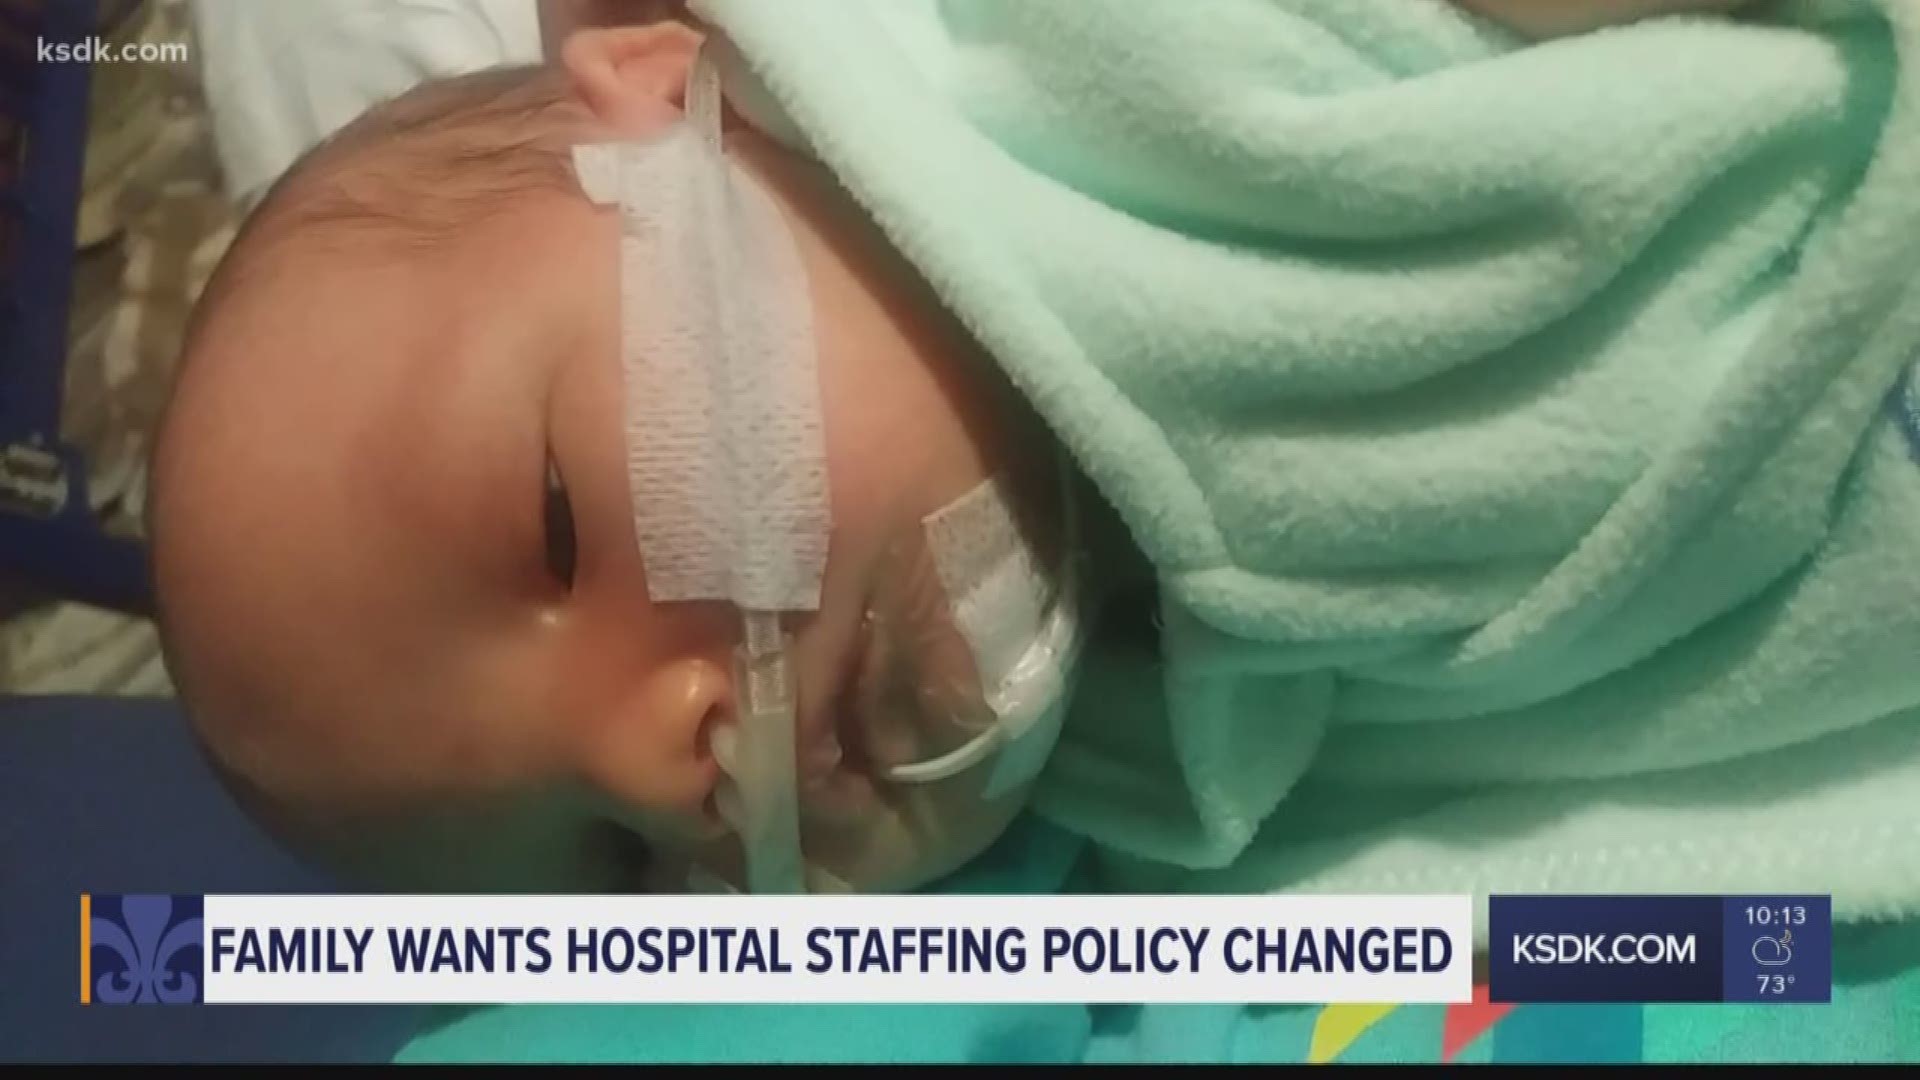 Family wants hospital staffing policy changed